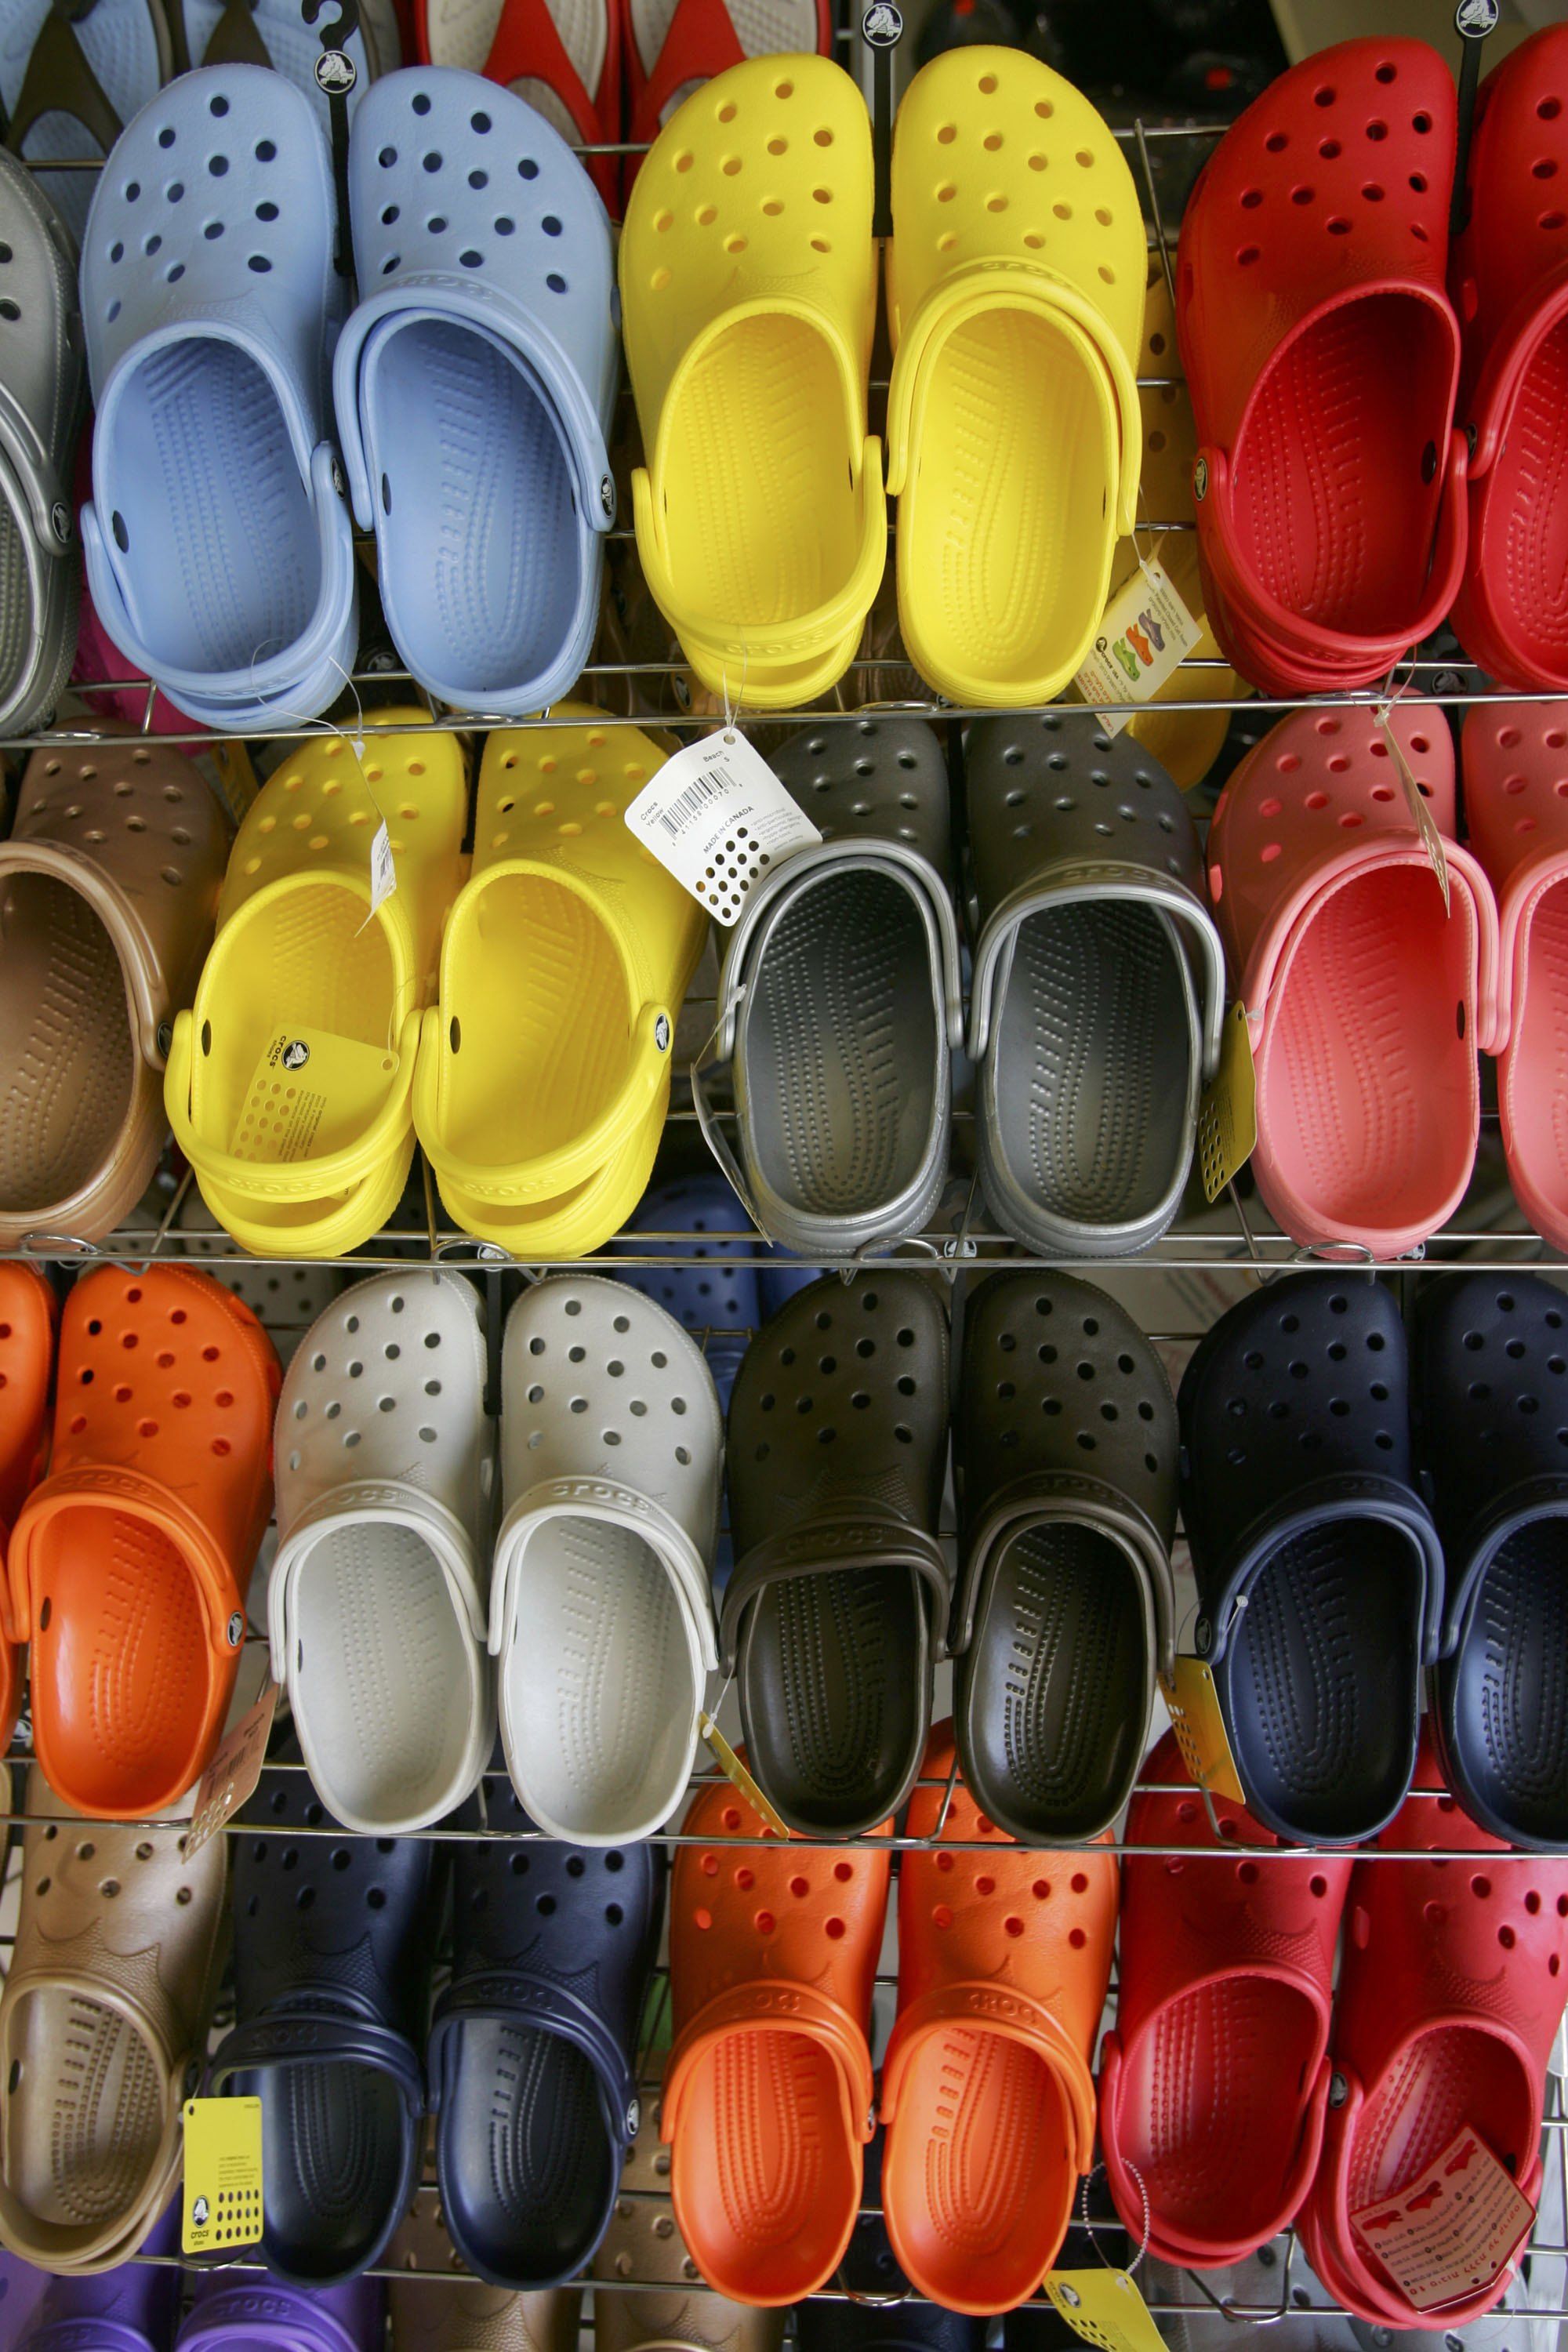 How Crocs Became the Unofficial Shoe of the Pandemic